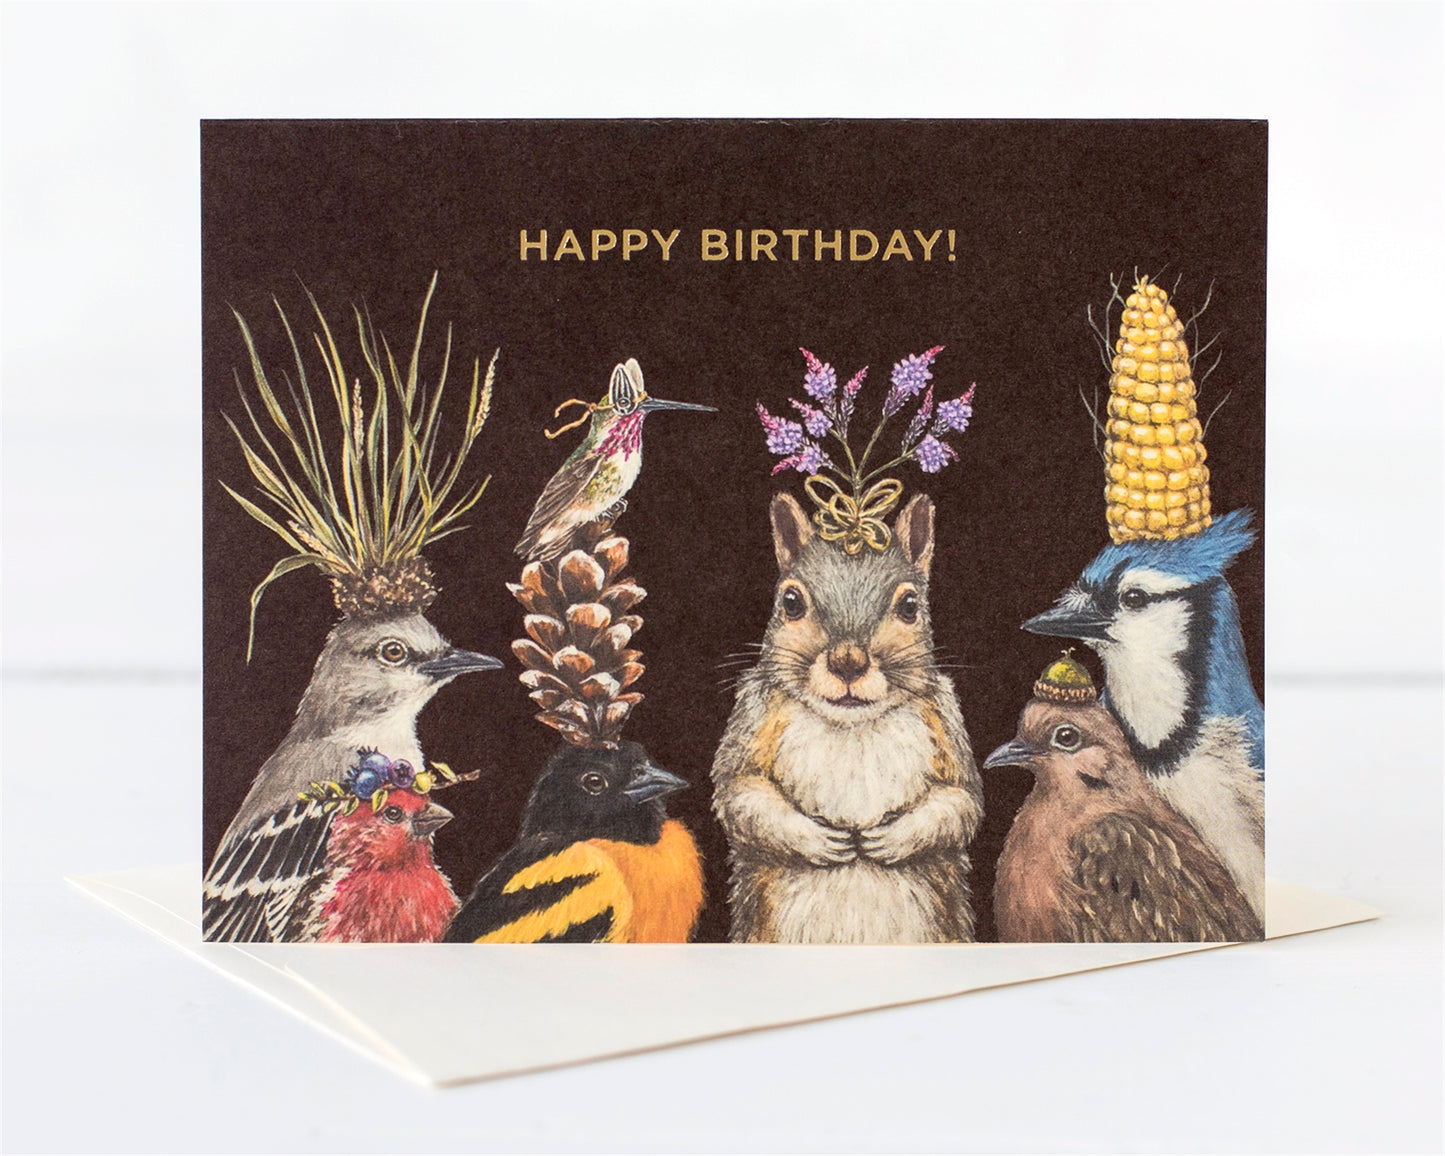 A group of woodland creatures' heads adorned with nature's bounty of flowers, nuts, pinecones, dressed up to wish you Happy Birthday 